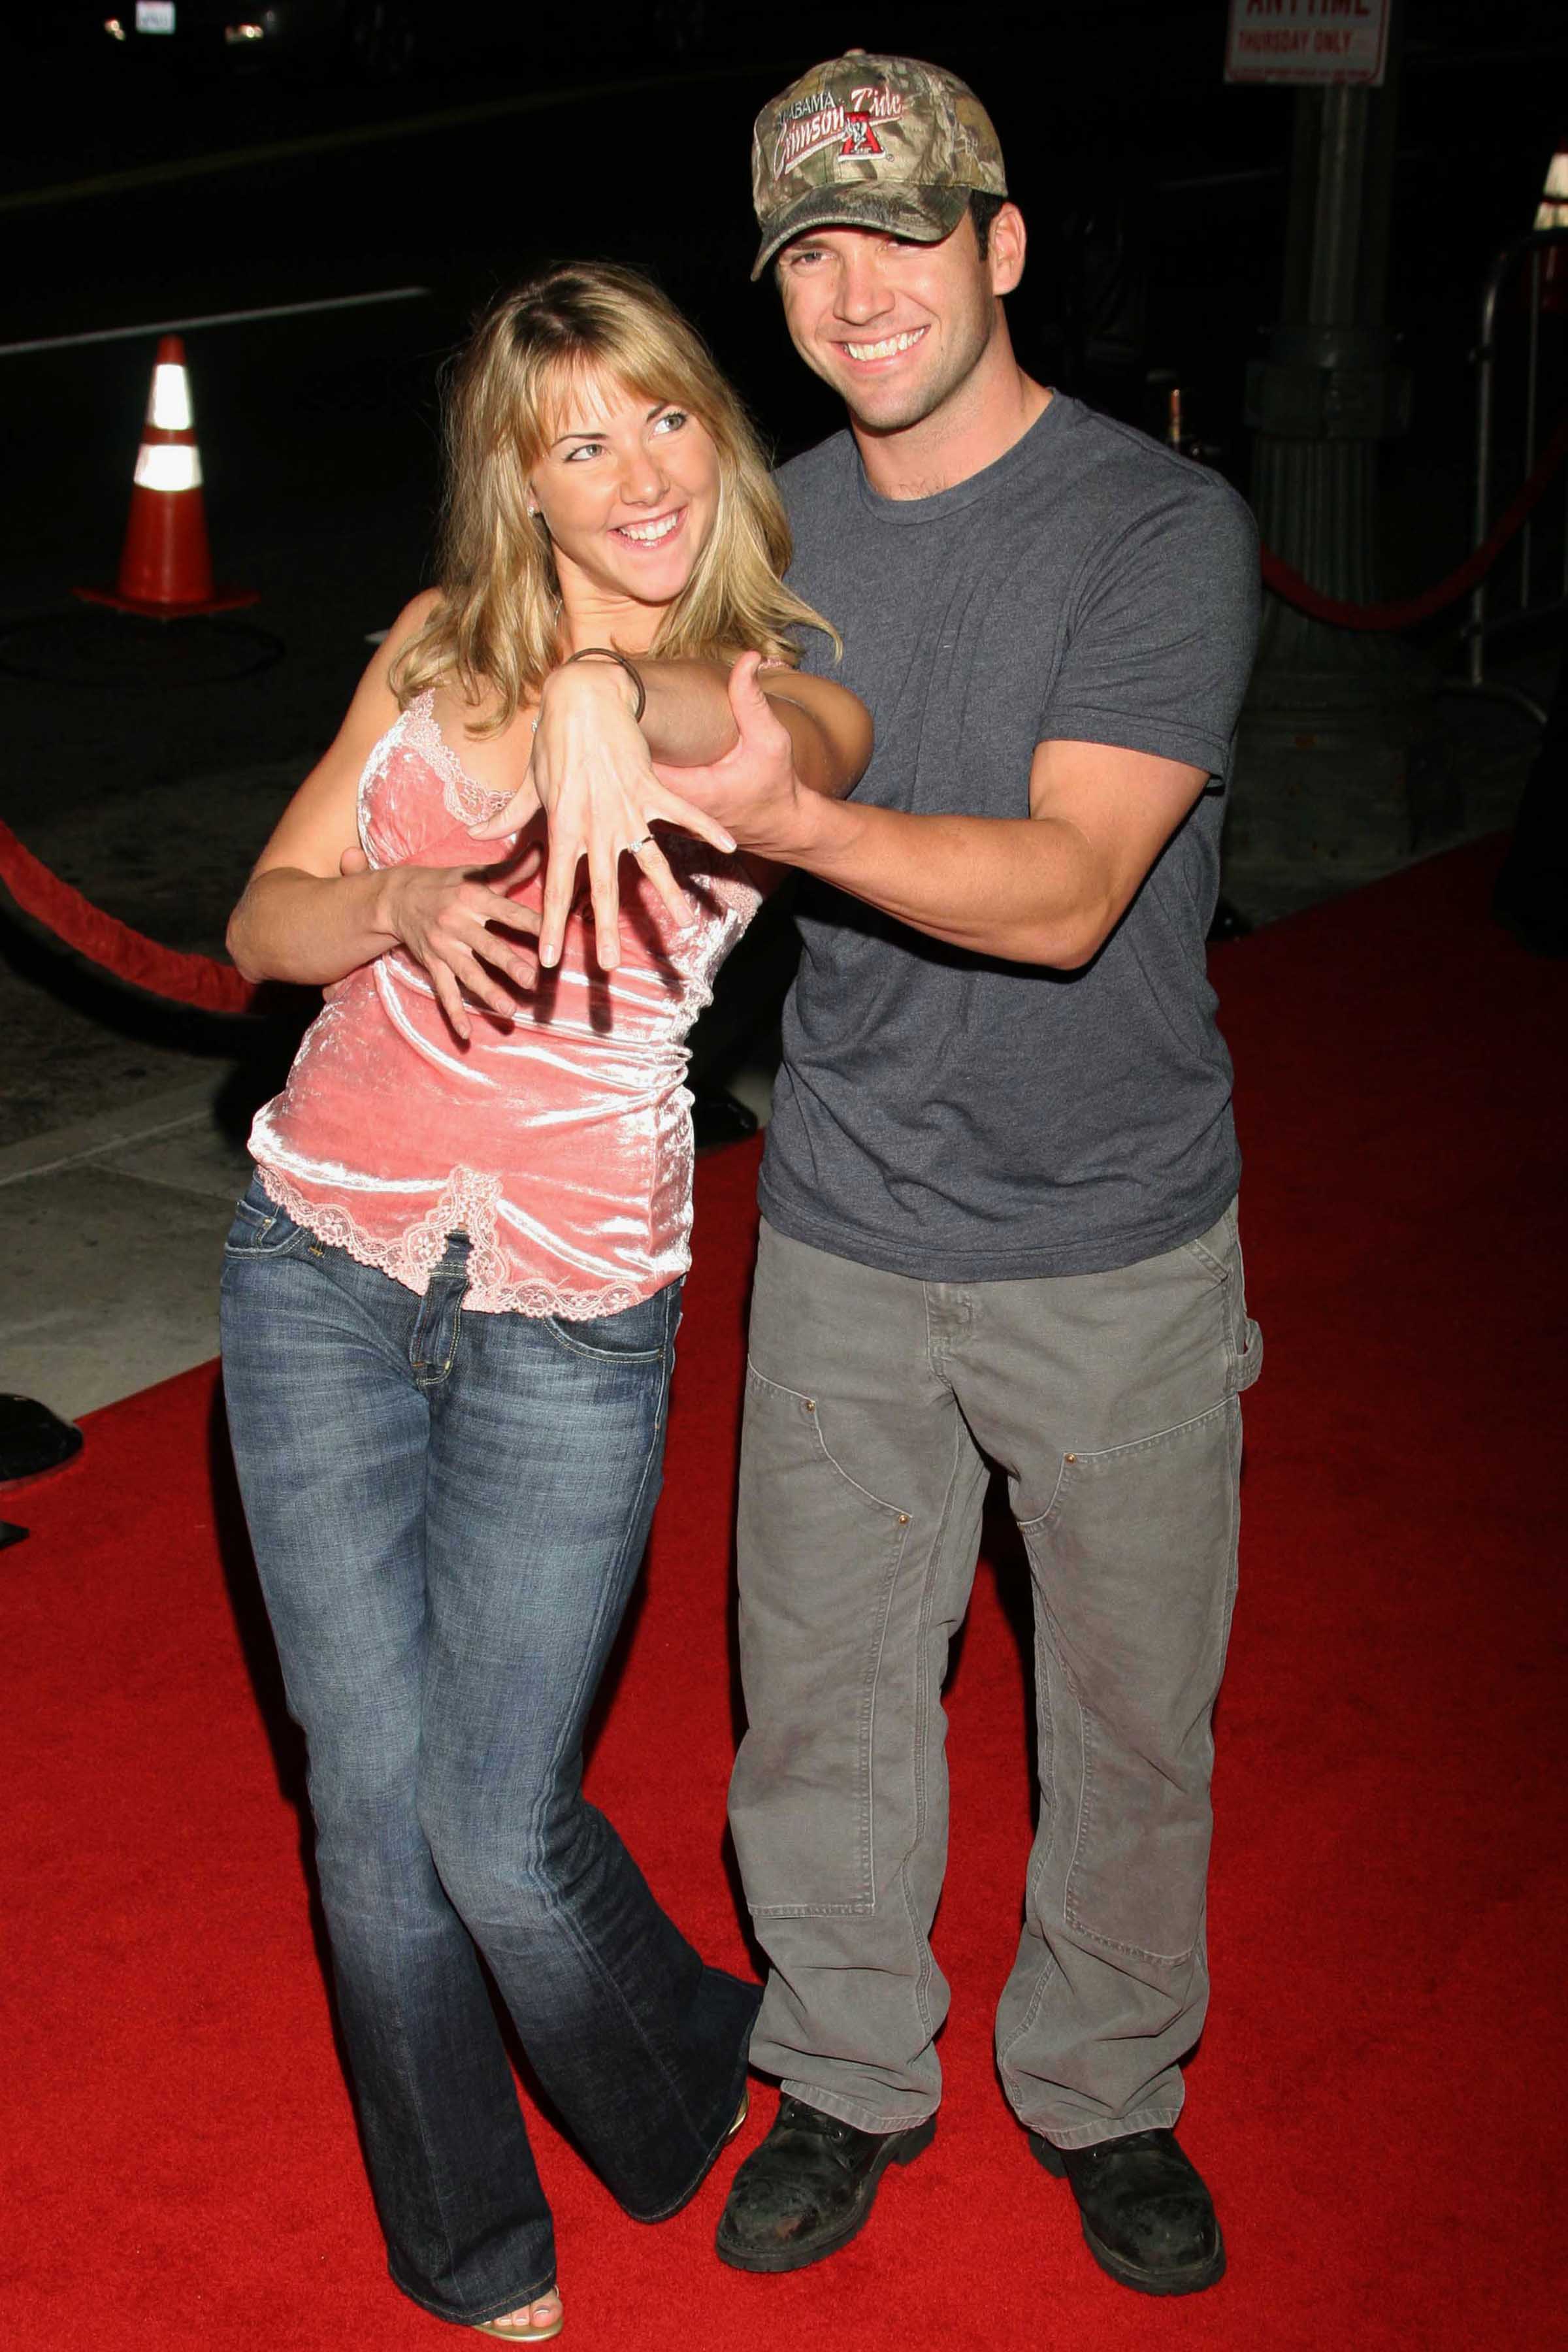 Maggie O'Brien and Lucas Black attend the premiere of "Jarhead" at Arclight Hollywood, on October 27, 2005, in Hollywood, California. | Source: Getty Images